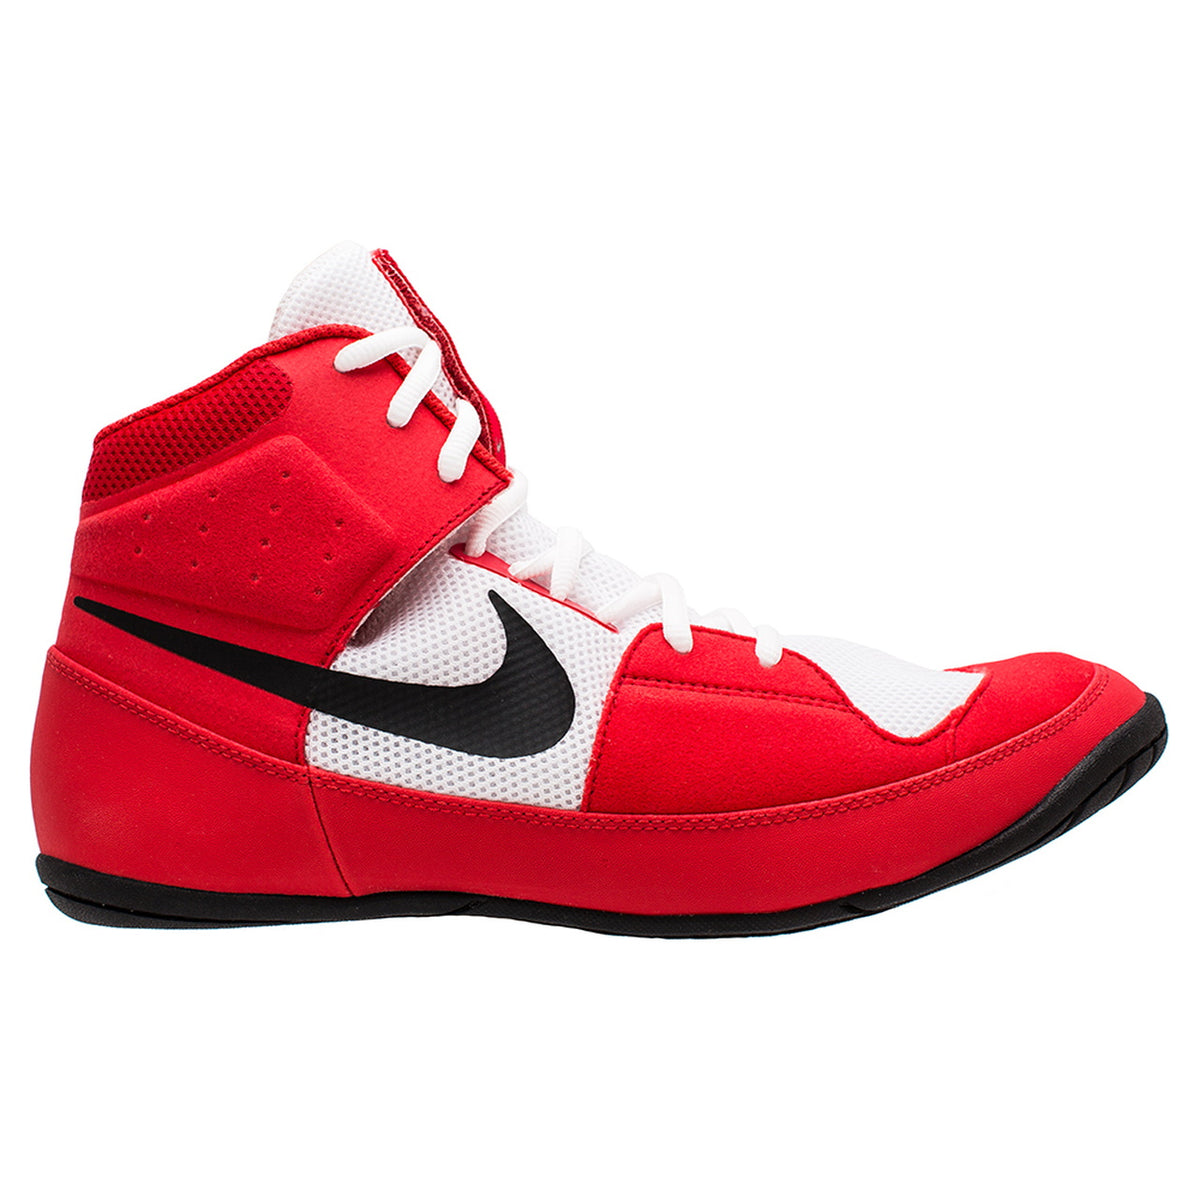 Nike Fury wrestling shoes. The ideal wrestling shoe for beginners and advanced wrestlers. Great quality and traction on the mat. No matter whether in competition or training. With wrestling shoes from Nike you will be at the forefront. Here in the color red/white